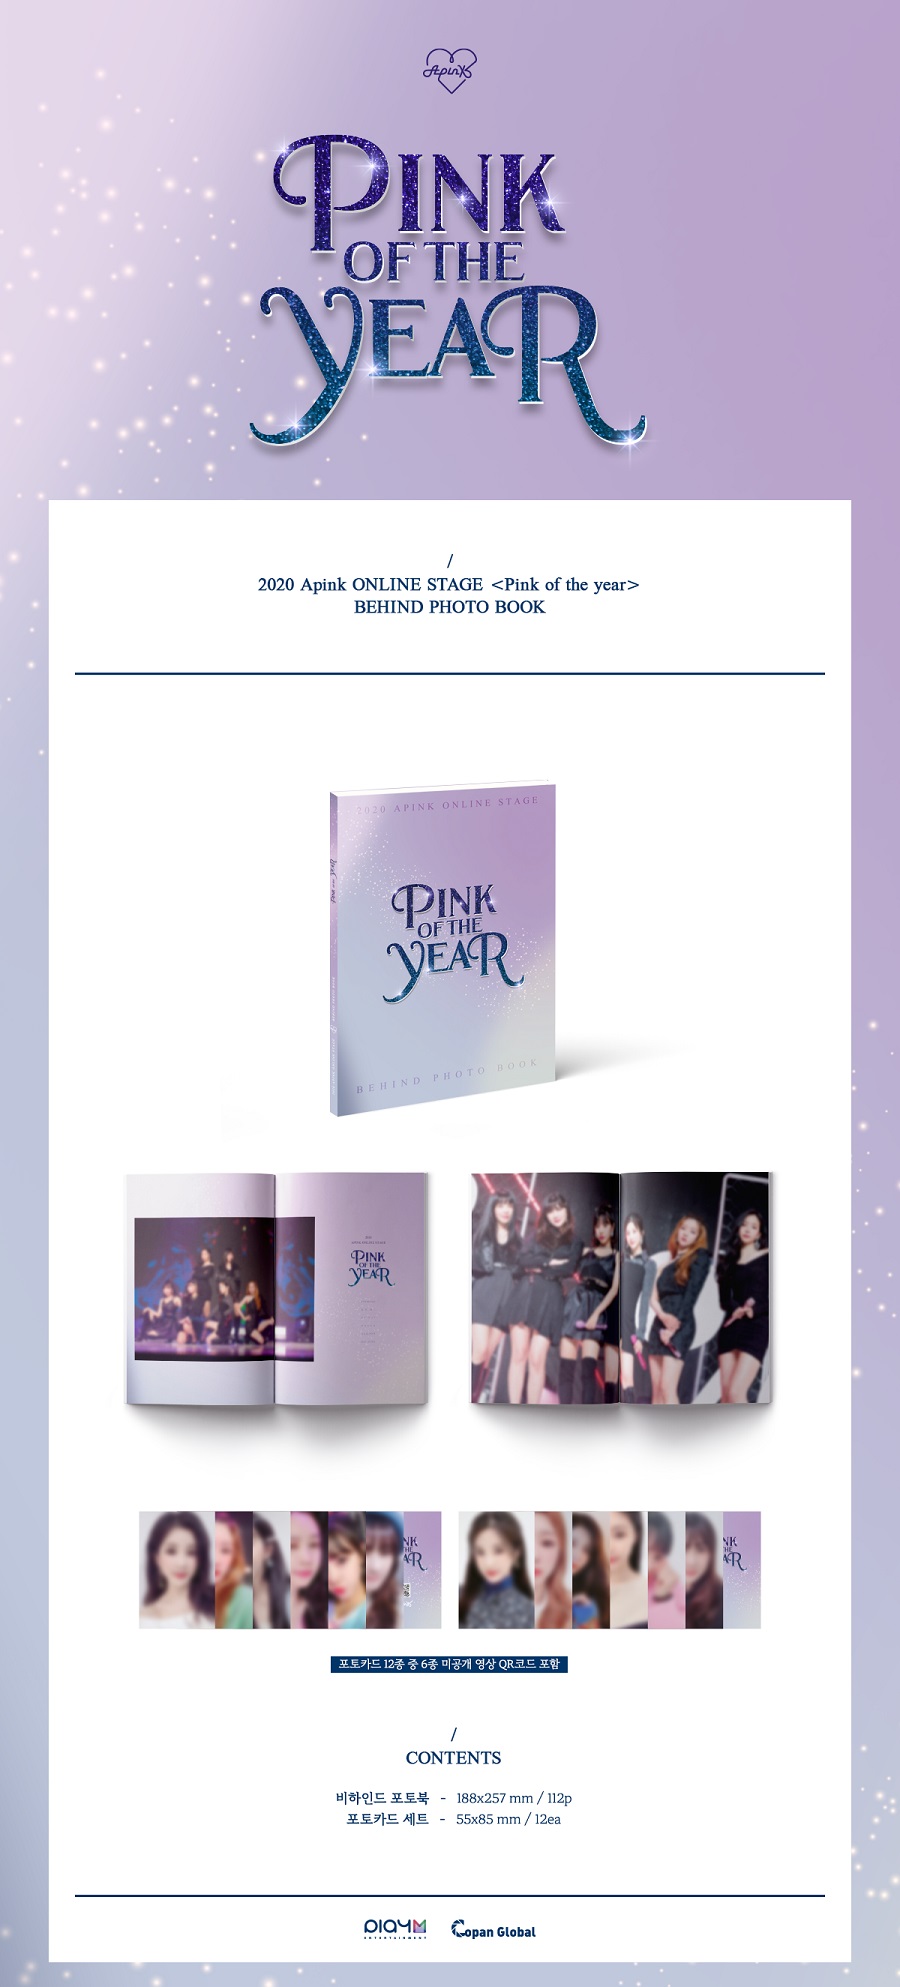 APINK(에이핑크) - 2020 Apink ONLINE STAGE <Pink of the year> BEHIND PHOTO BOOK